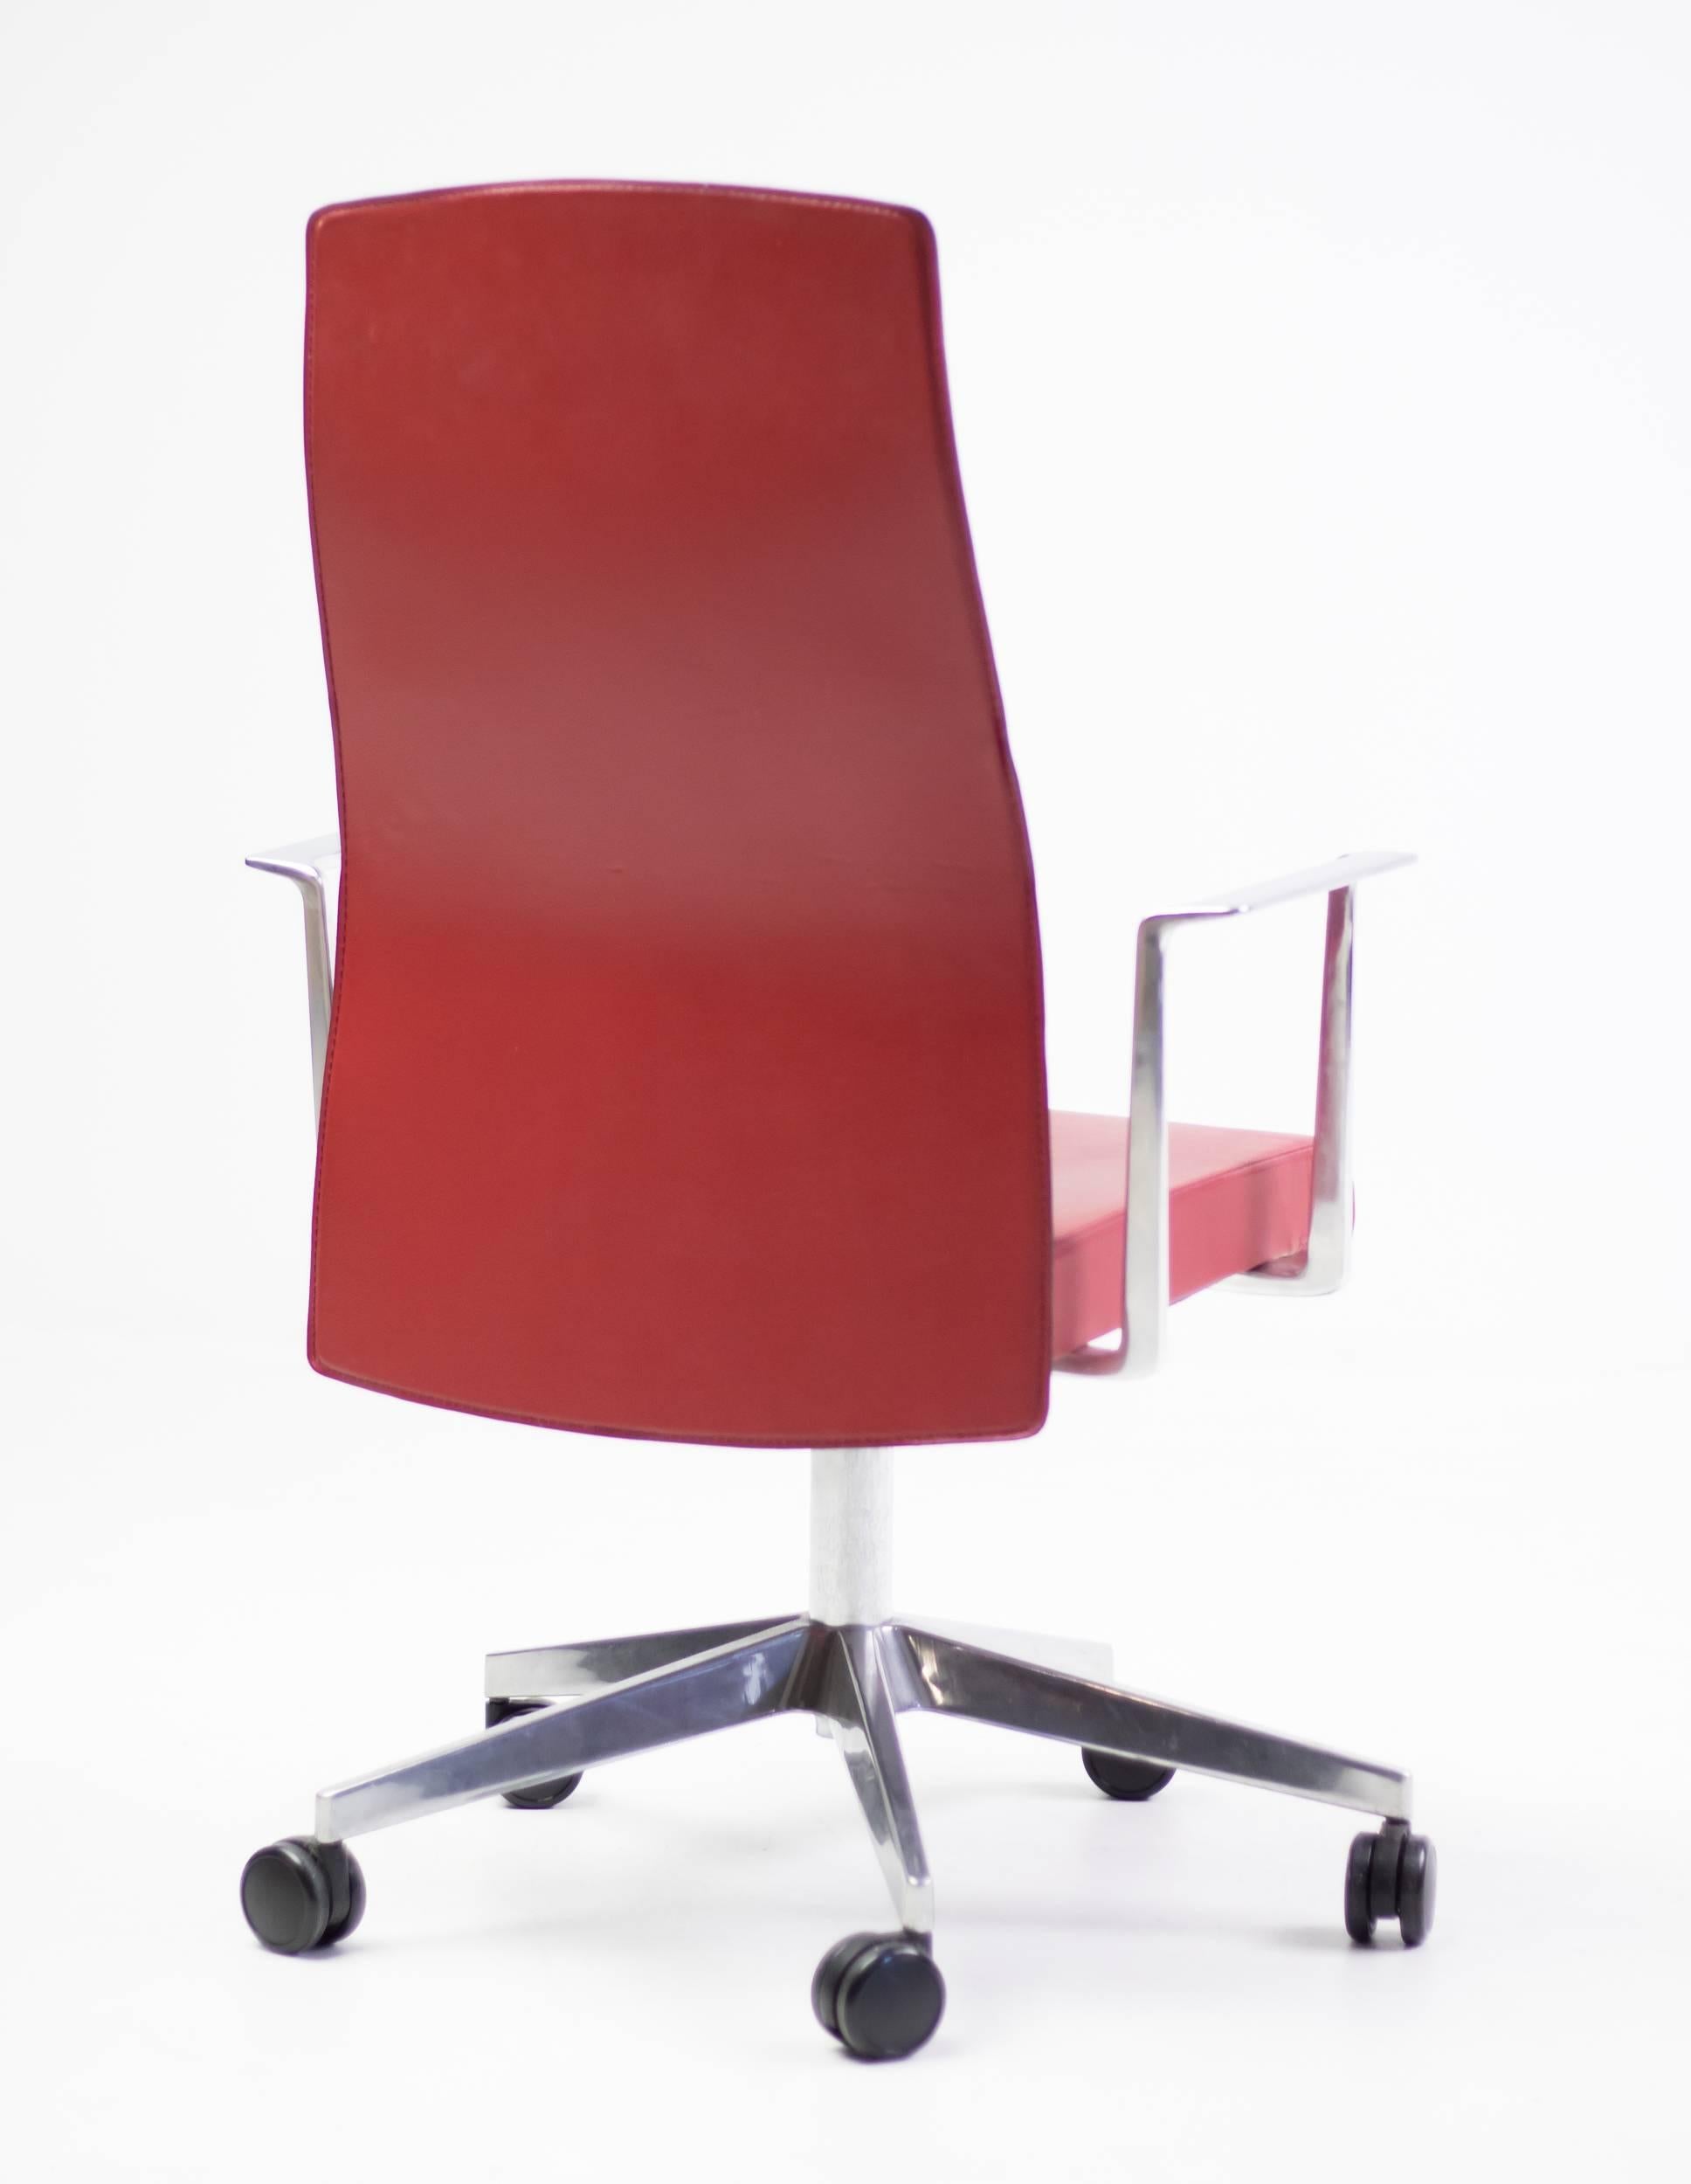 Cast 8 Muga Conference Chairs by Jorge Pensi